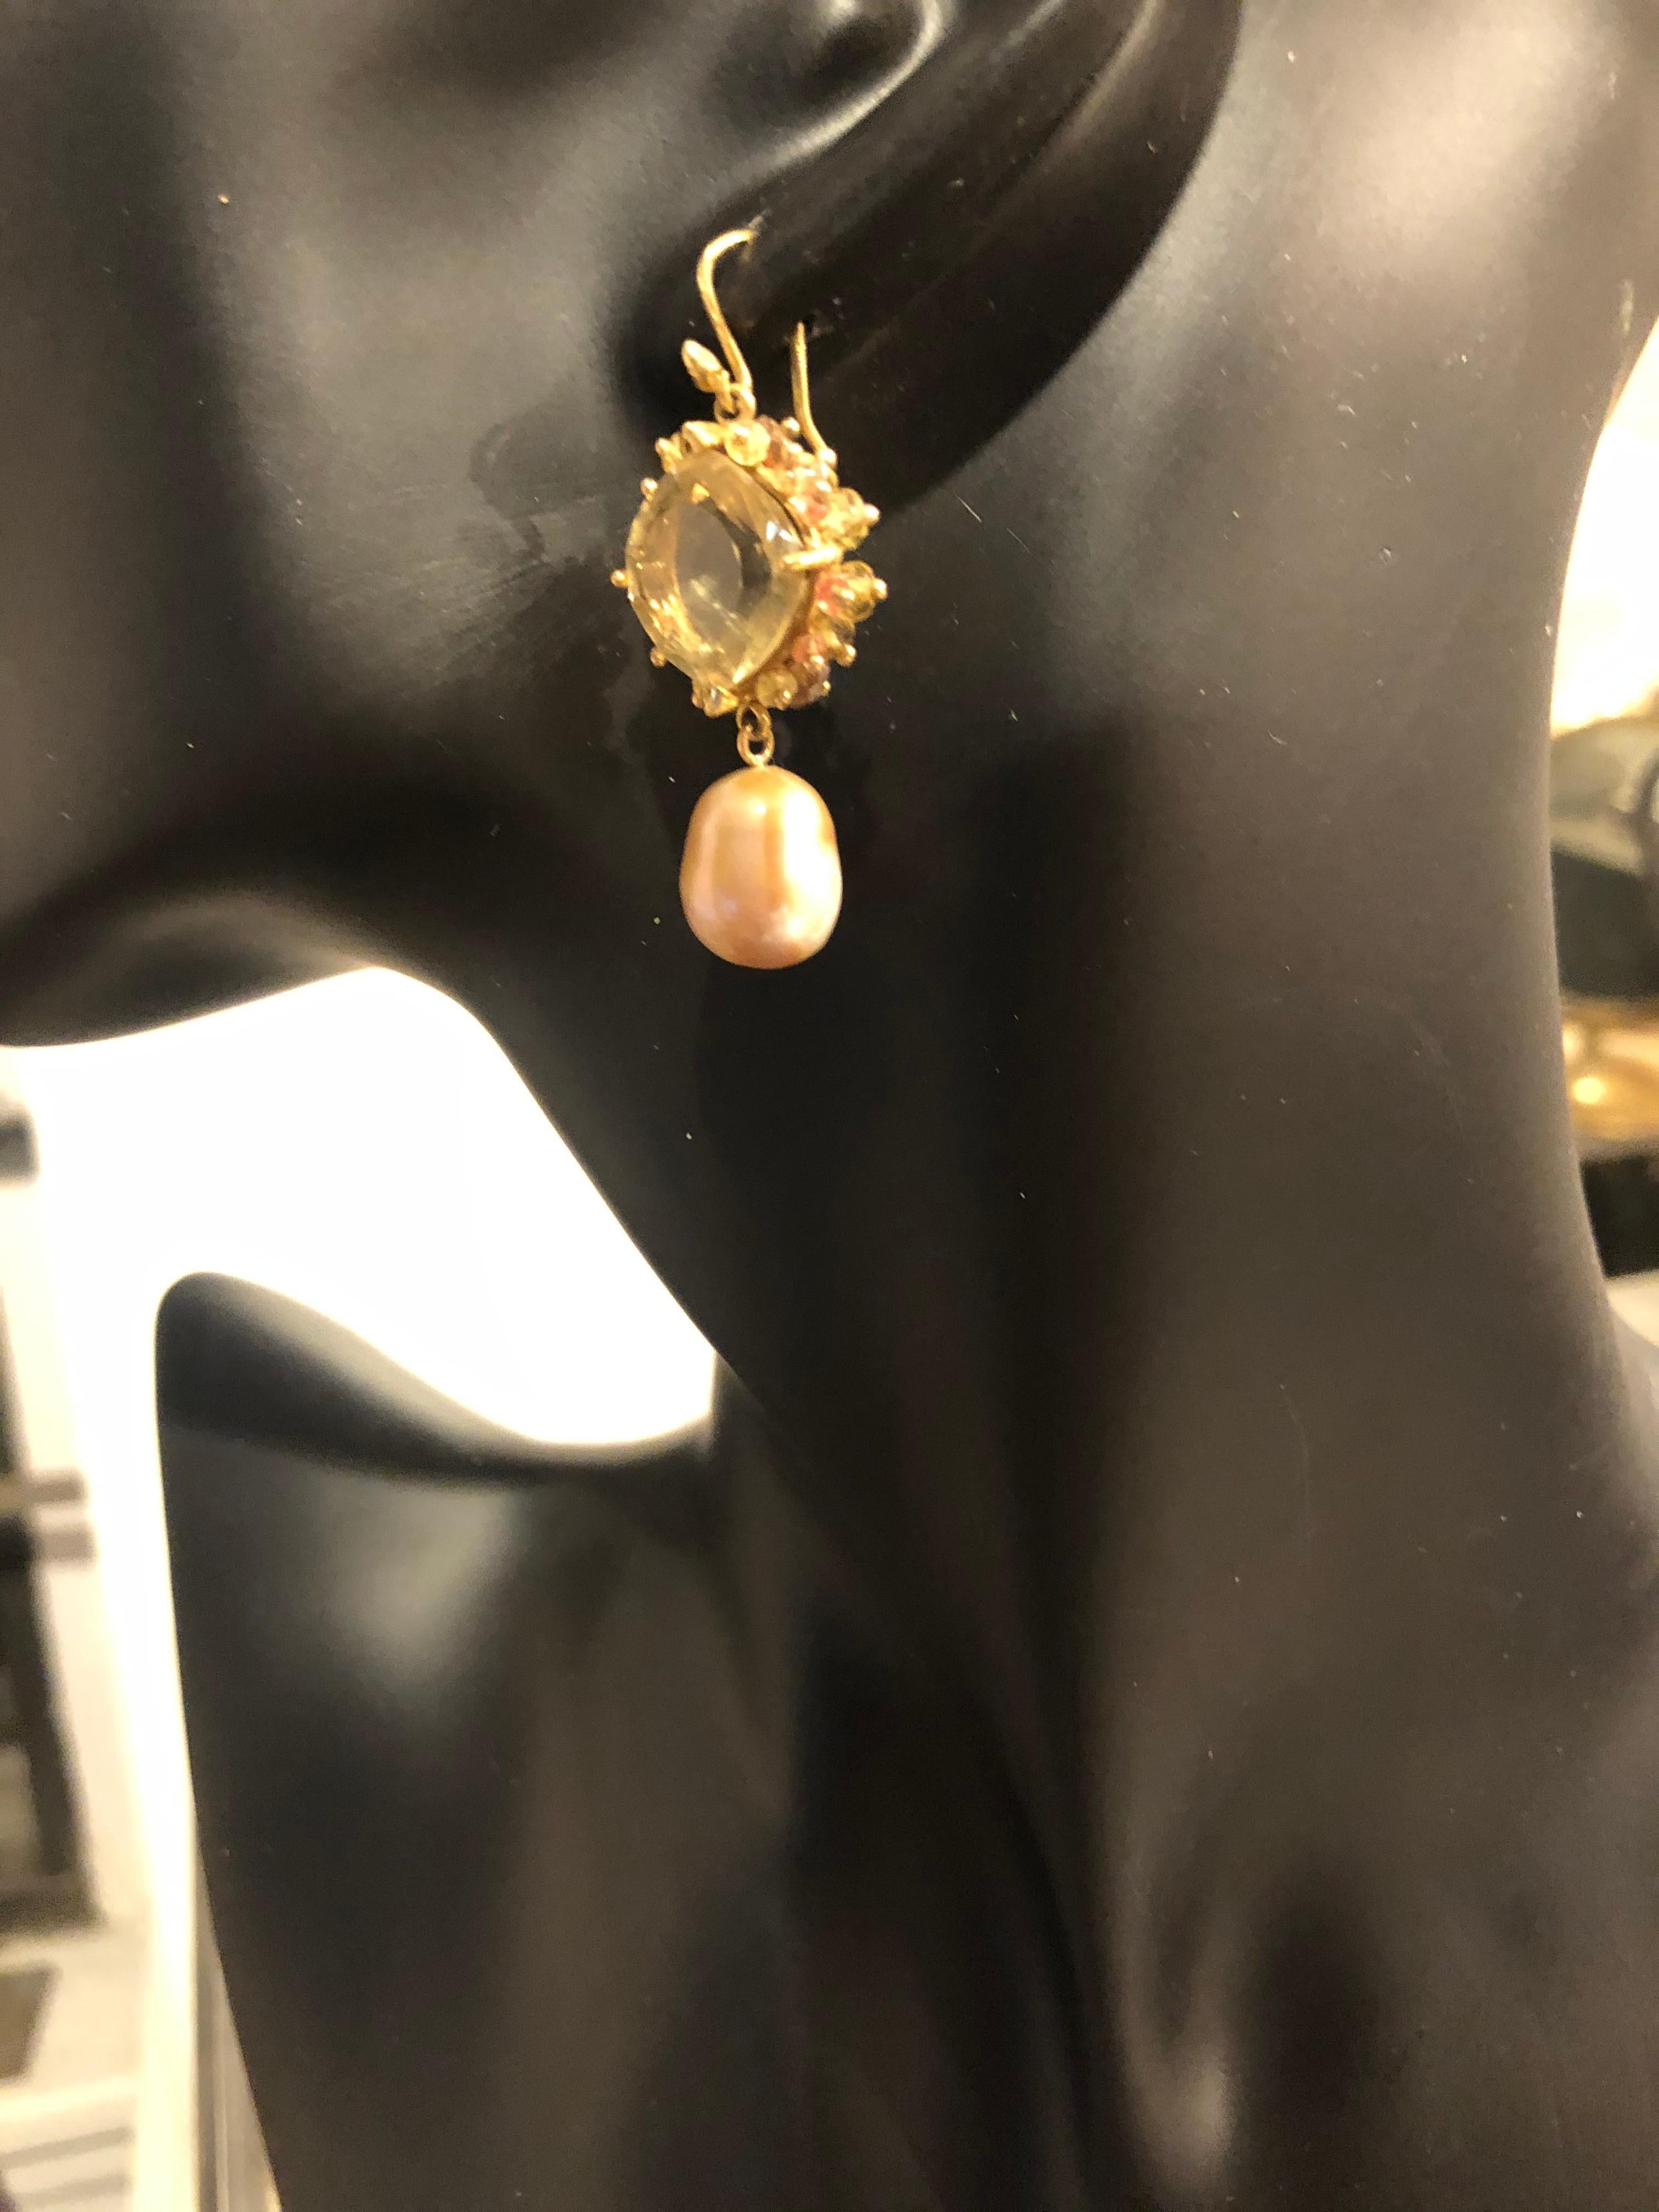 There is a certain woman who can define style with her own flair and joy for living—and this earring is for her. At once original and classic, this design is defined by a pair of remarkable faceted oro verde center stones, surrounded by prong set